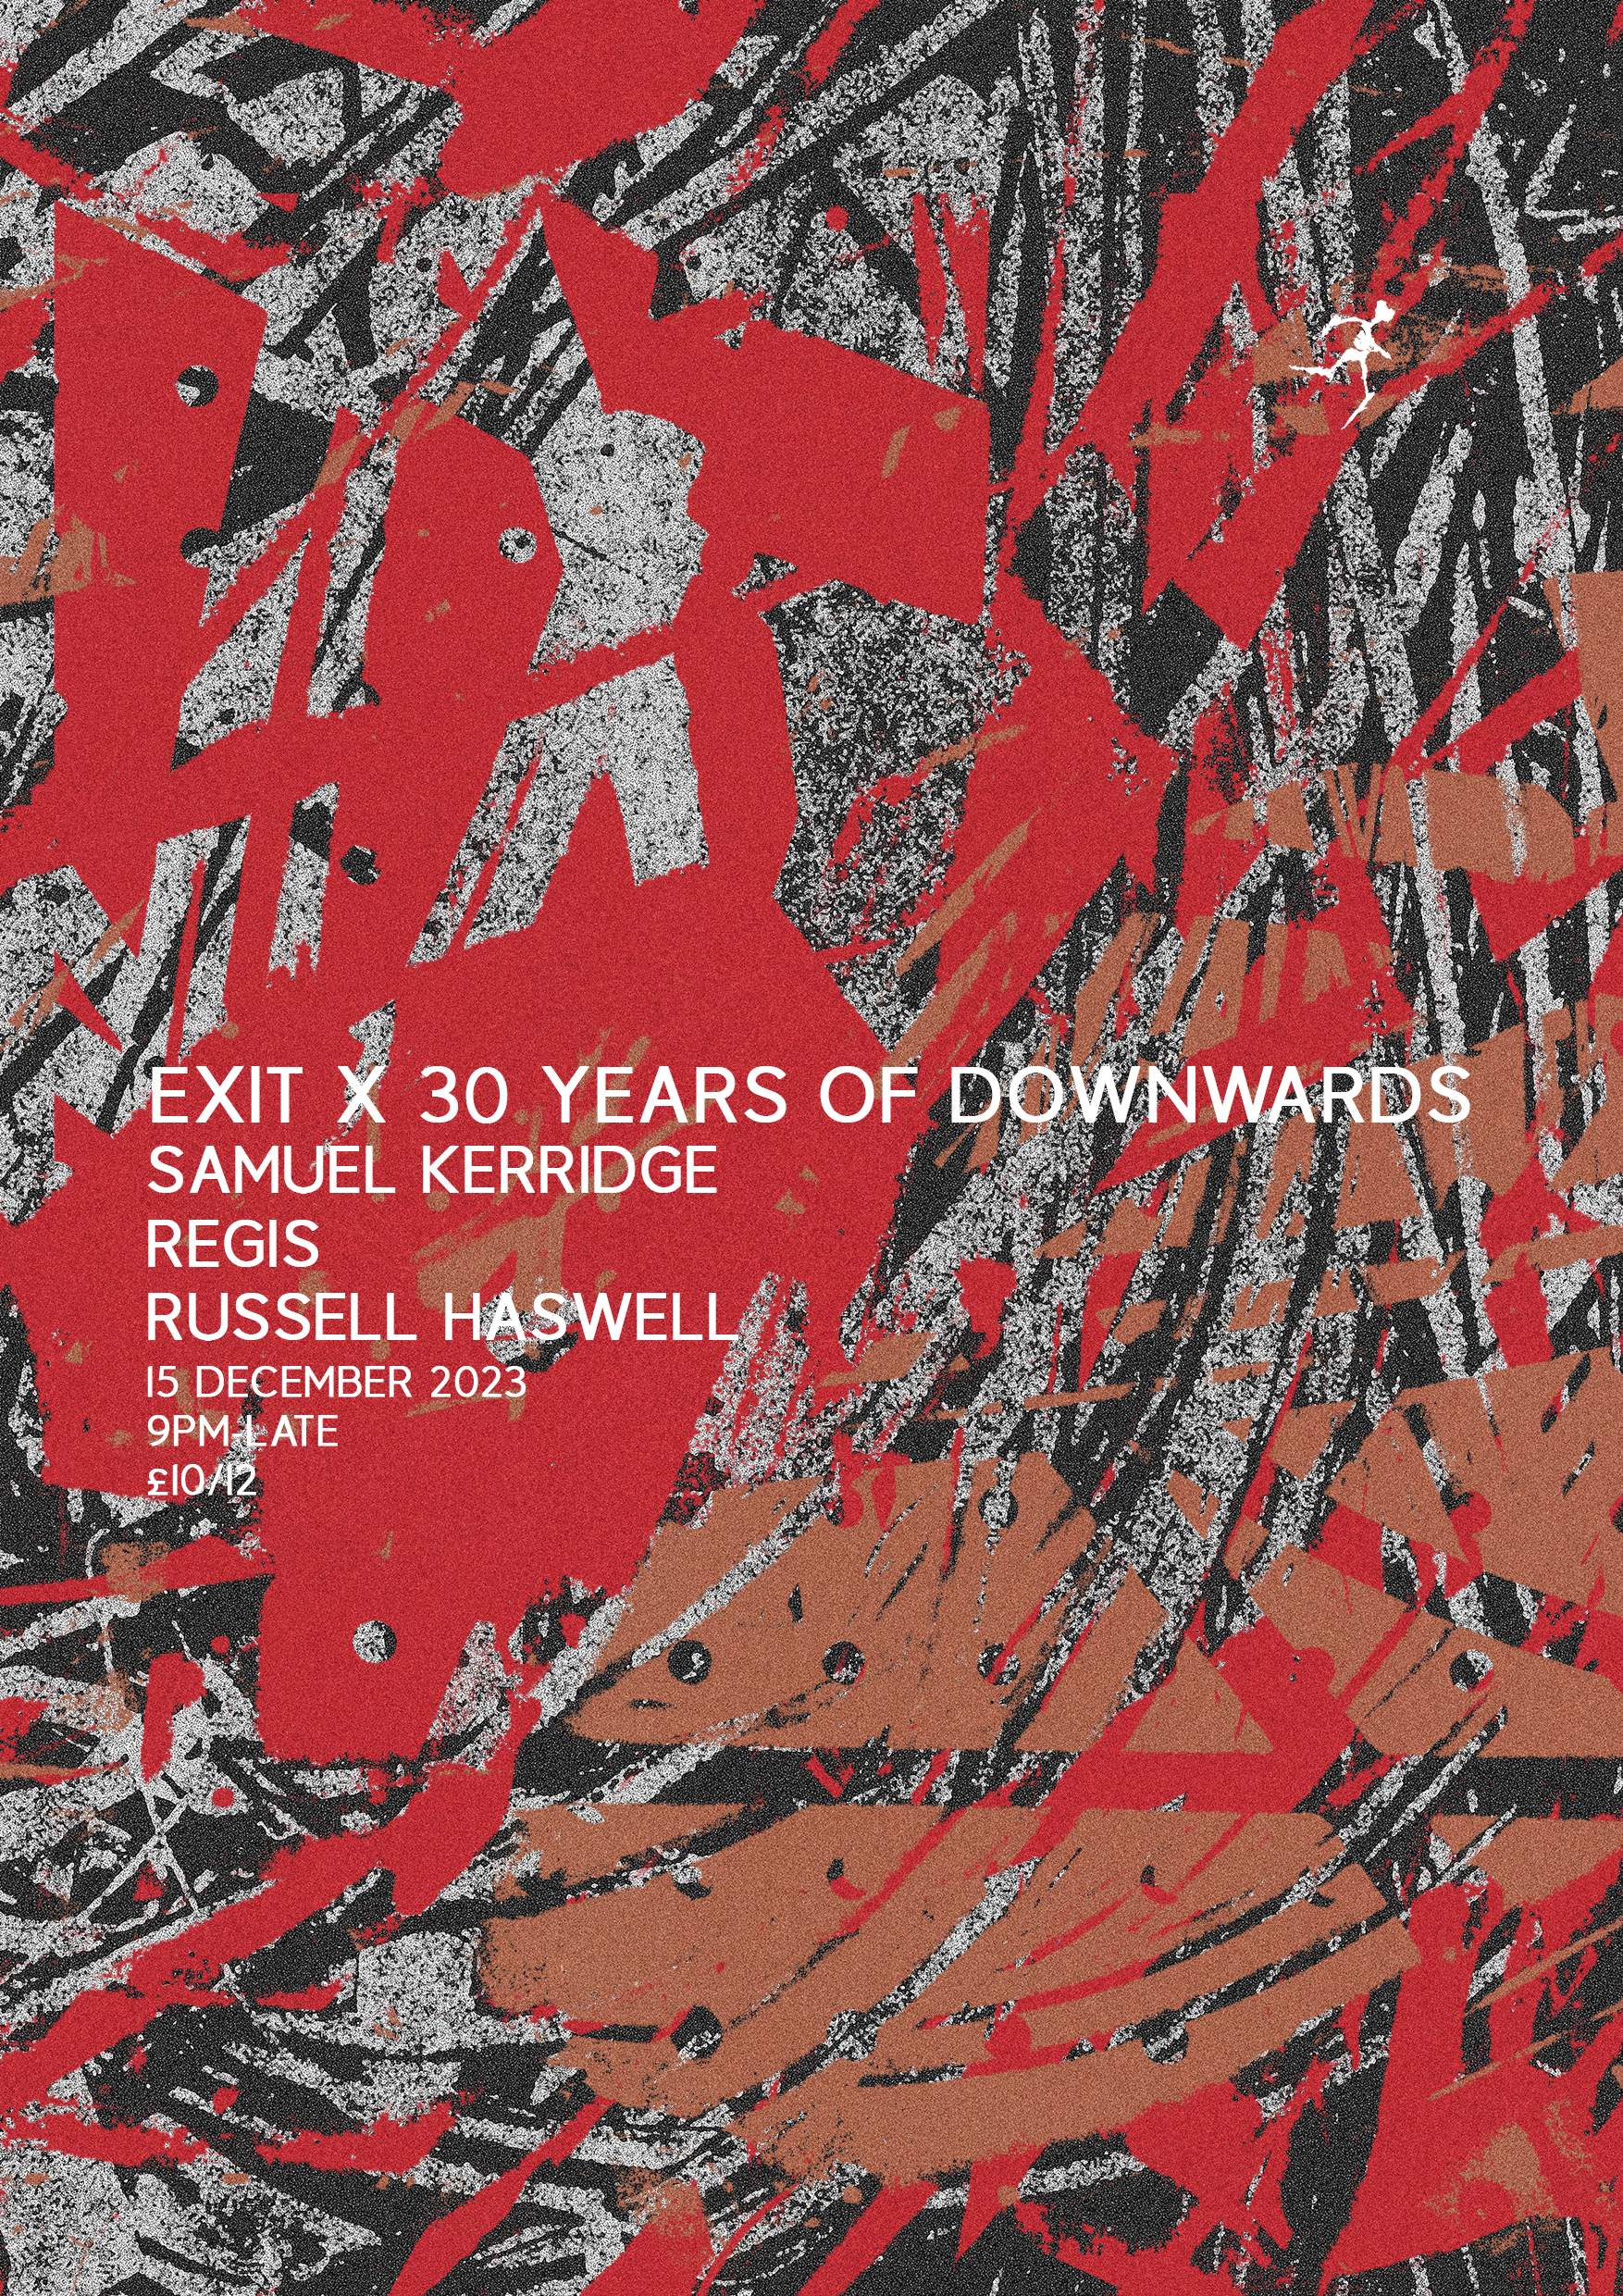 EXIT X 30 YEARS OF DOWNWARDS - フライヤー表